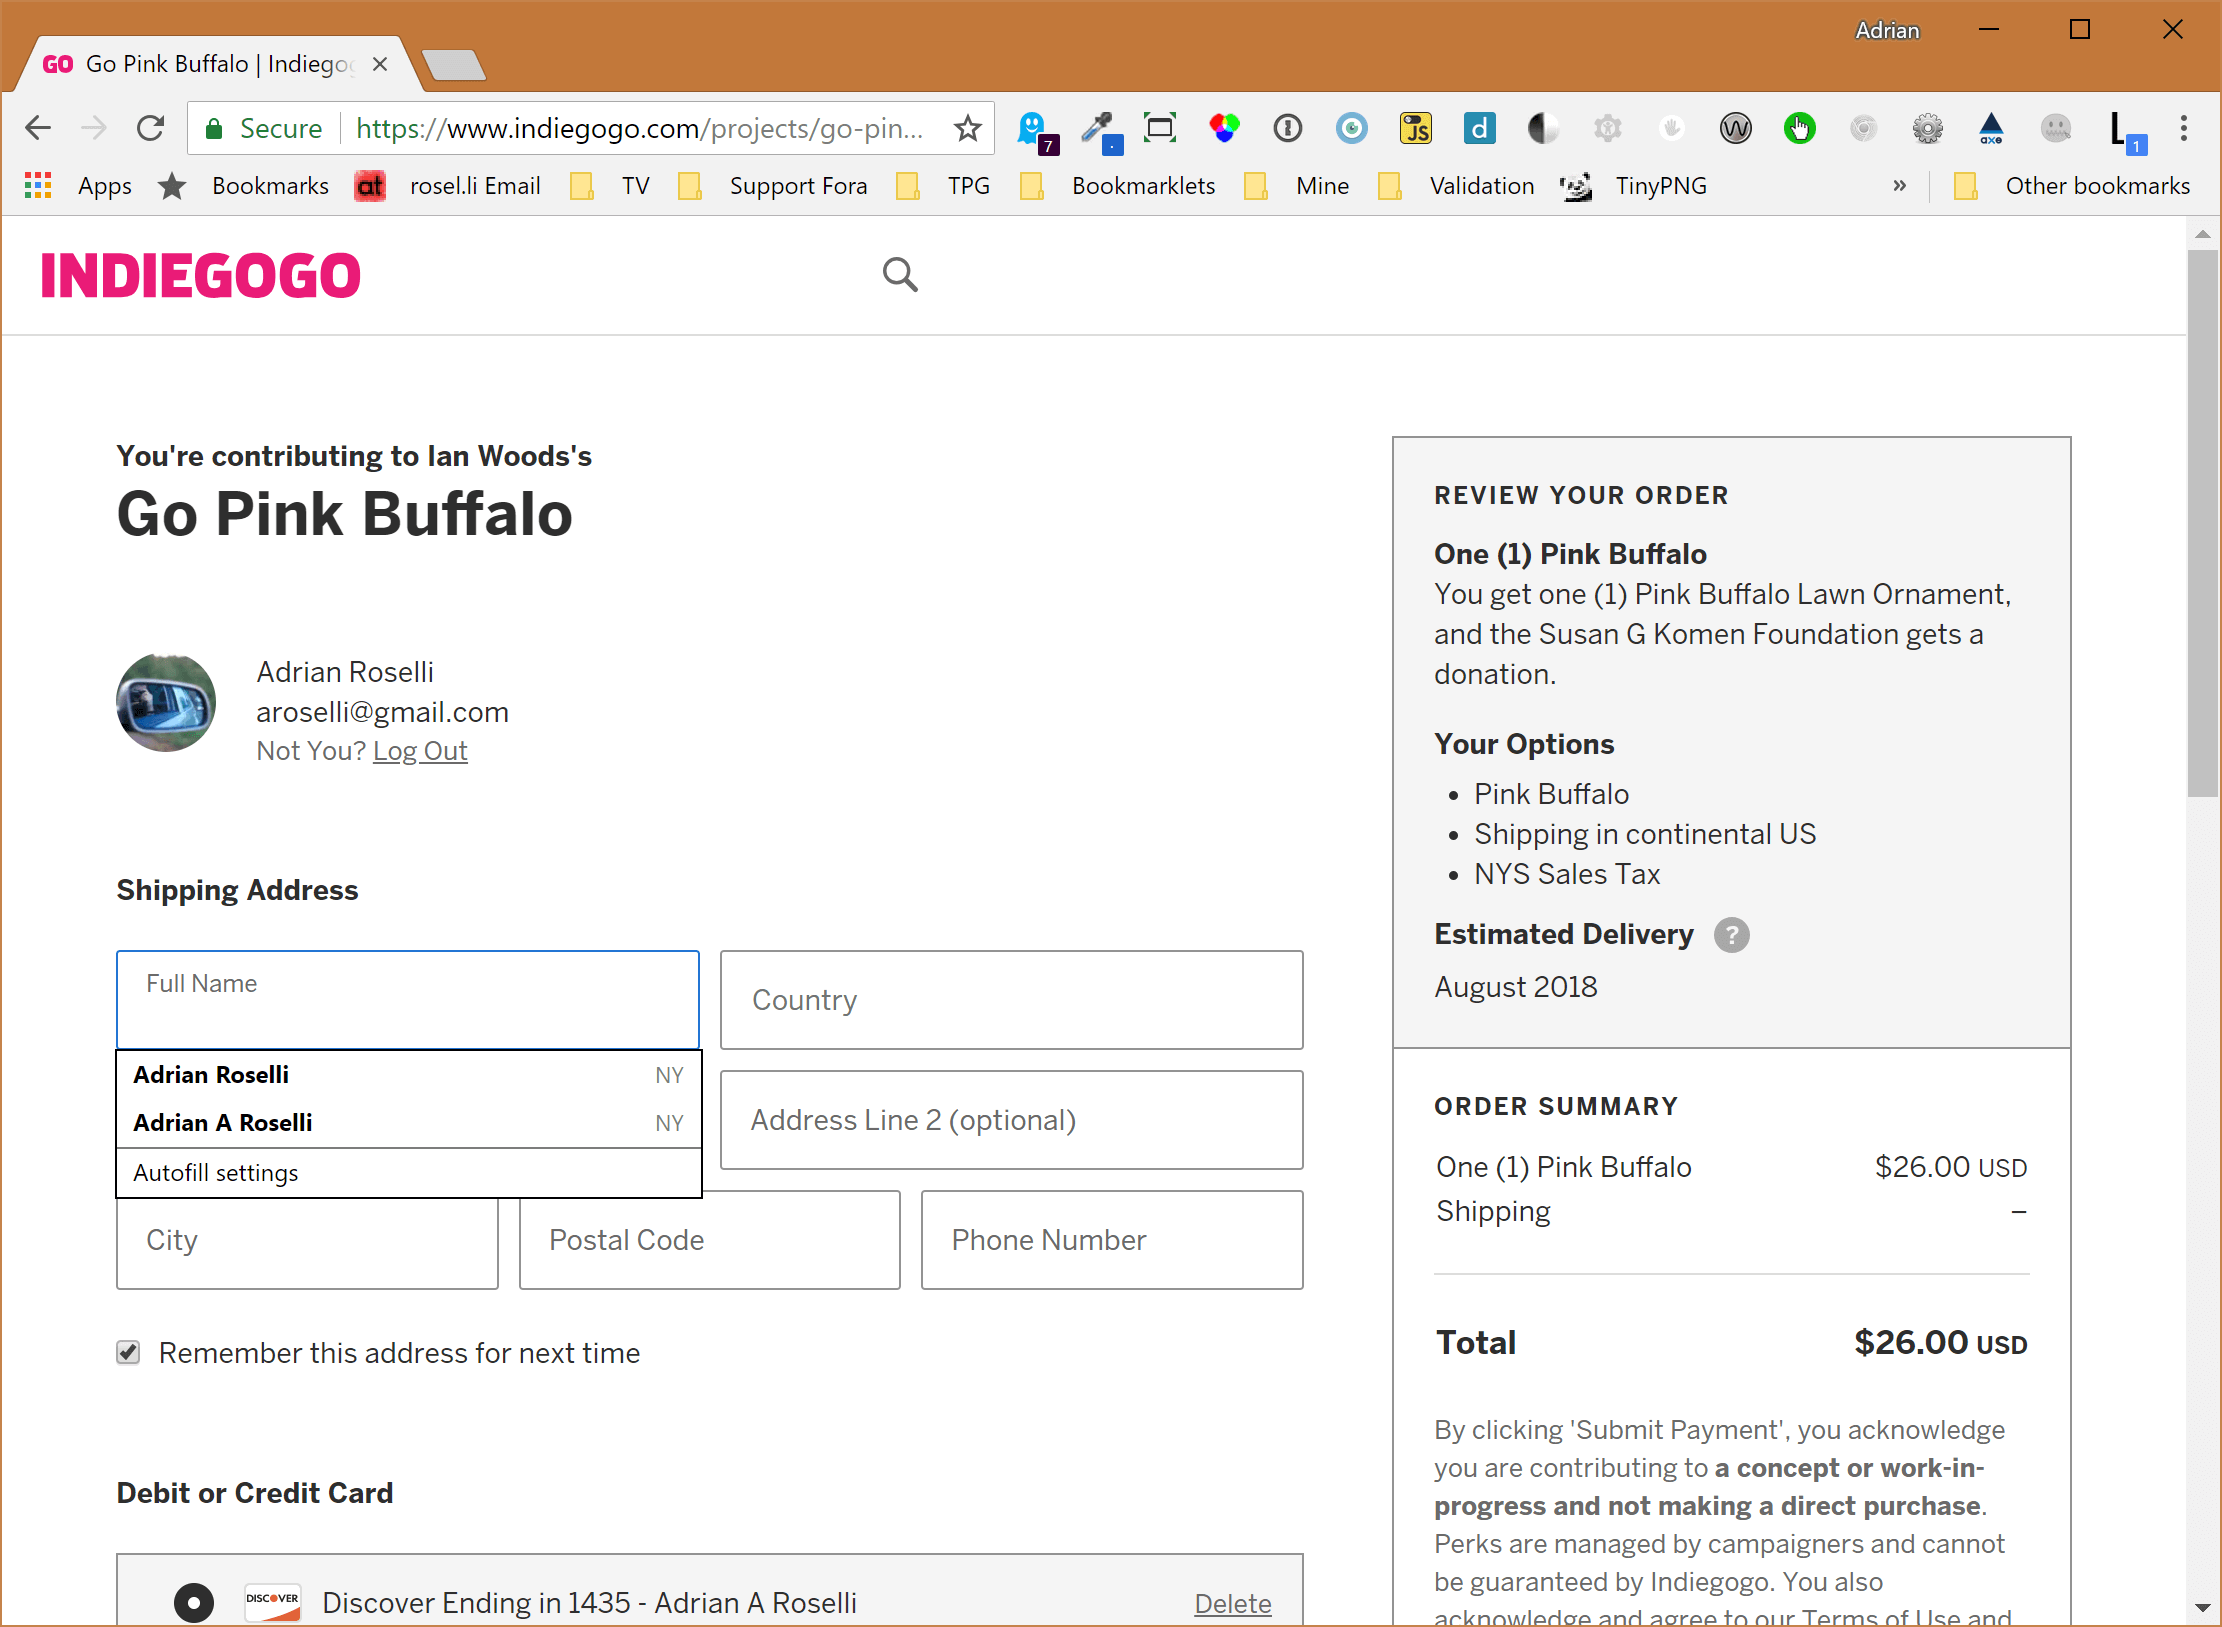 Indiegogo form for my shipping address showing the browser auto-complete feature on the Full Name field, offering my name as an option.